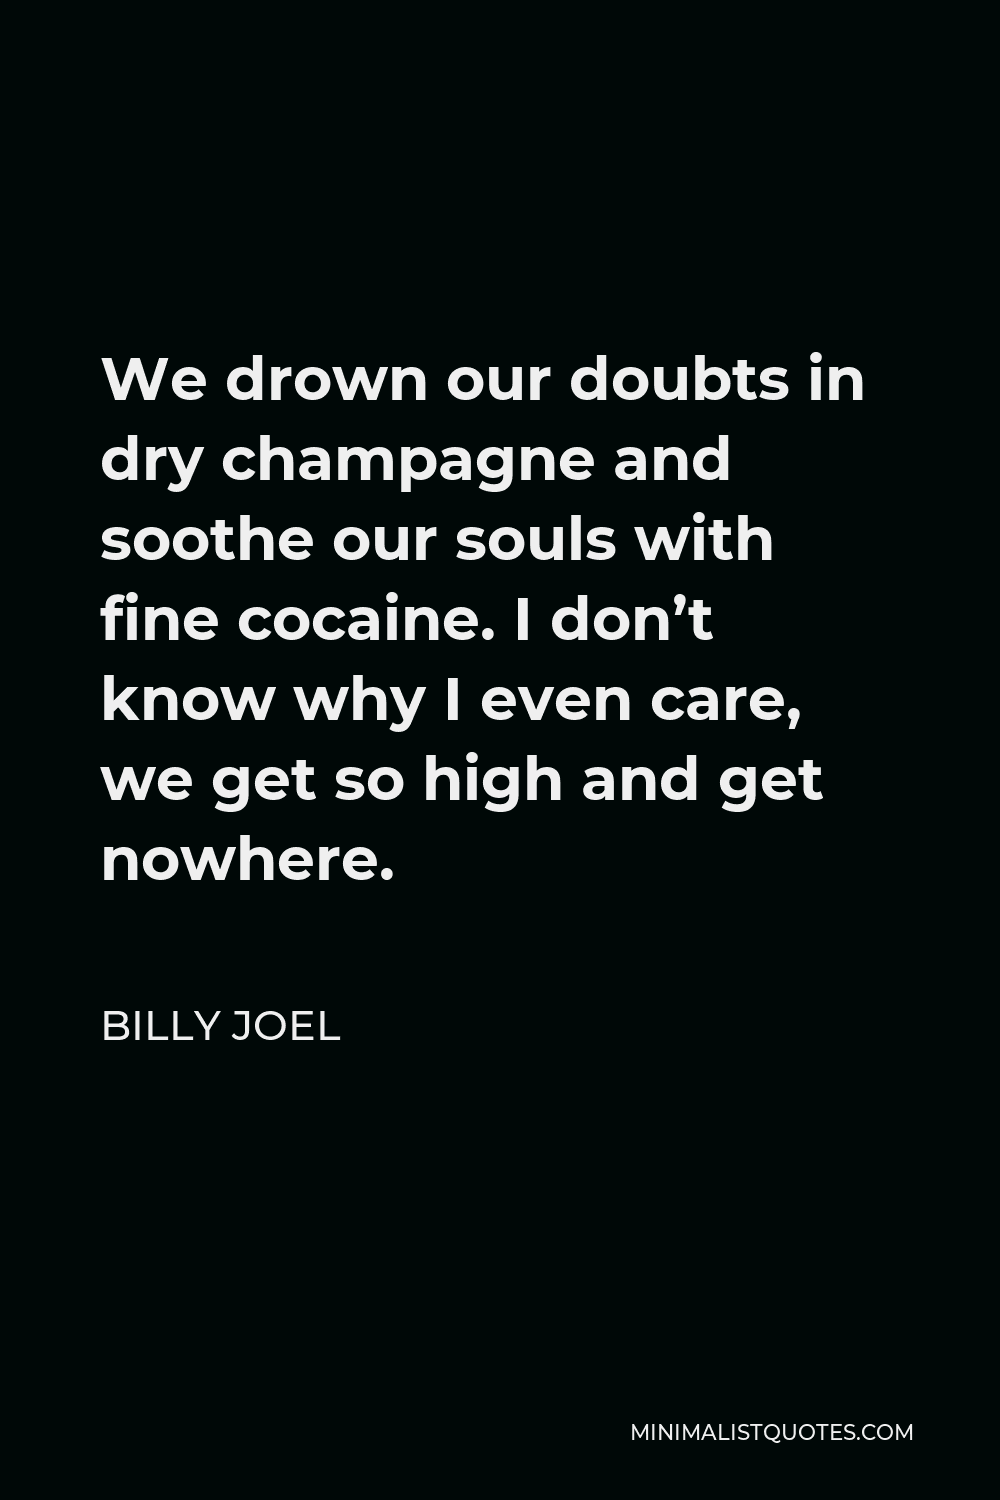 Billy Joel Quote - We drown our doubts in dry champagne and soothe our souls with fine cocaine. I don’t know why I even care, we get so high and get nowhere.